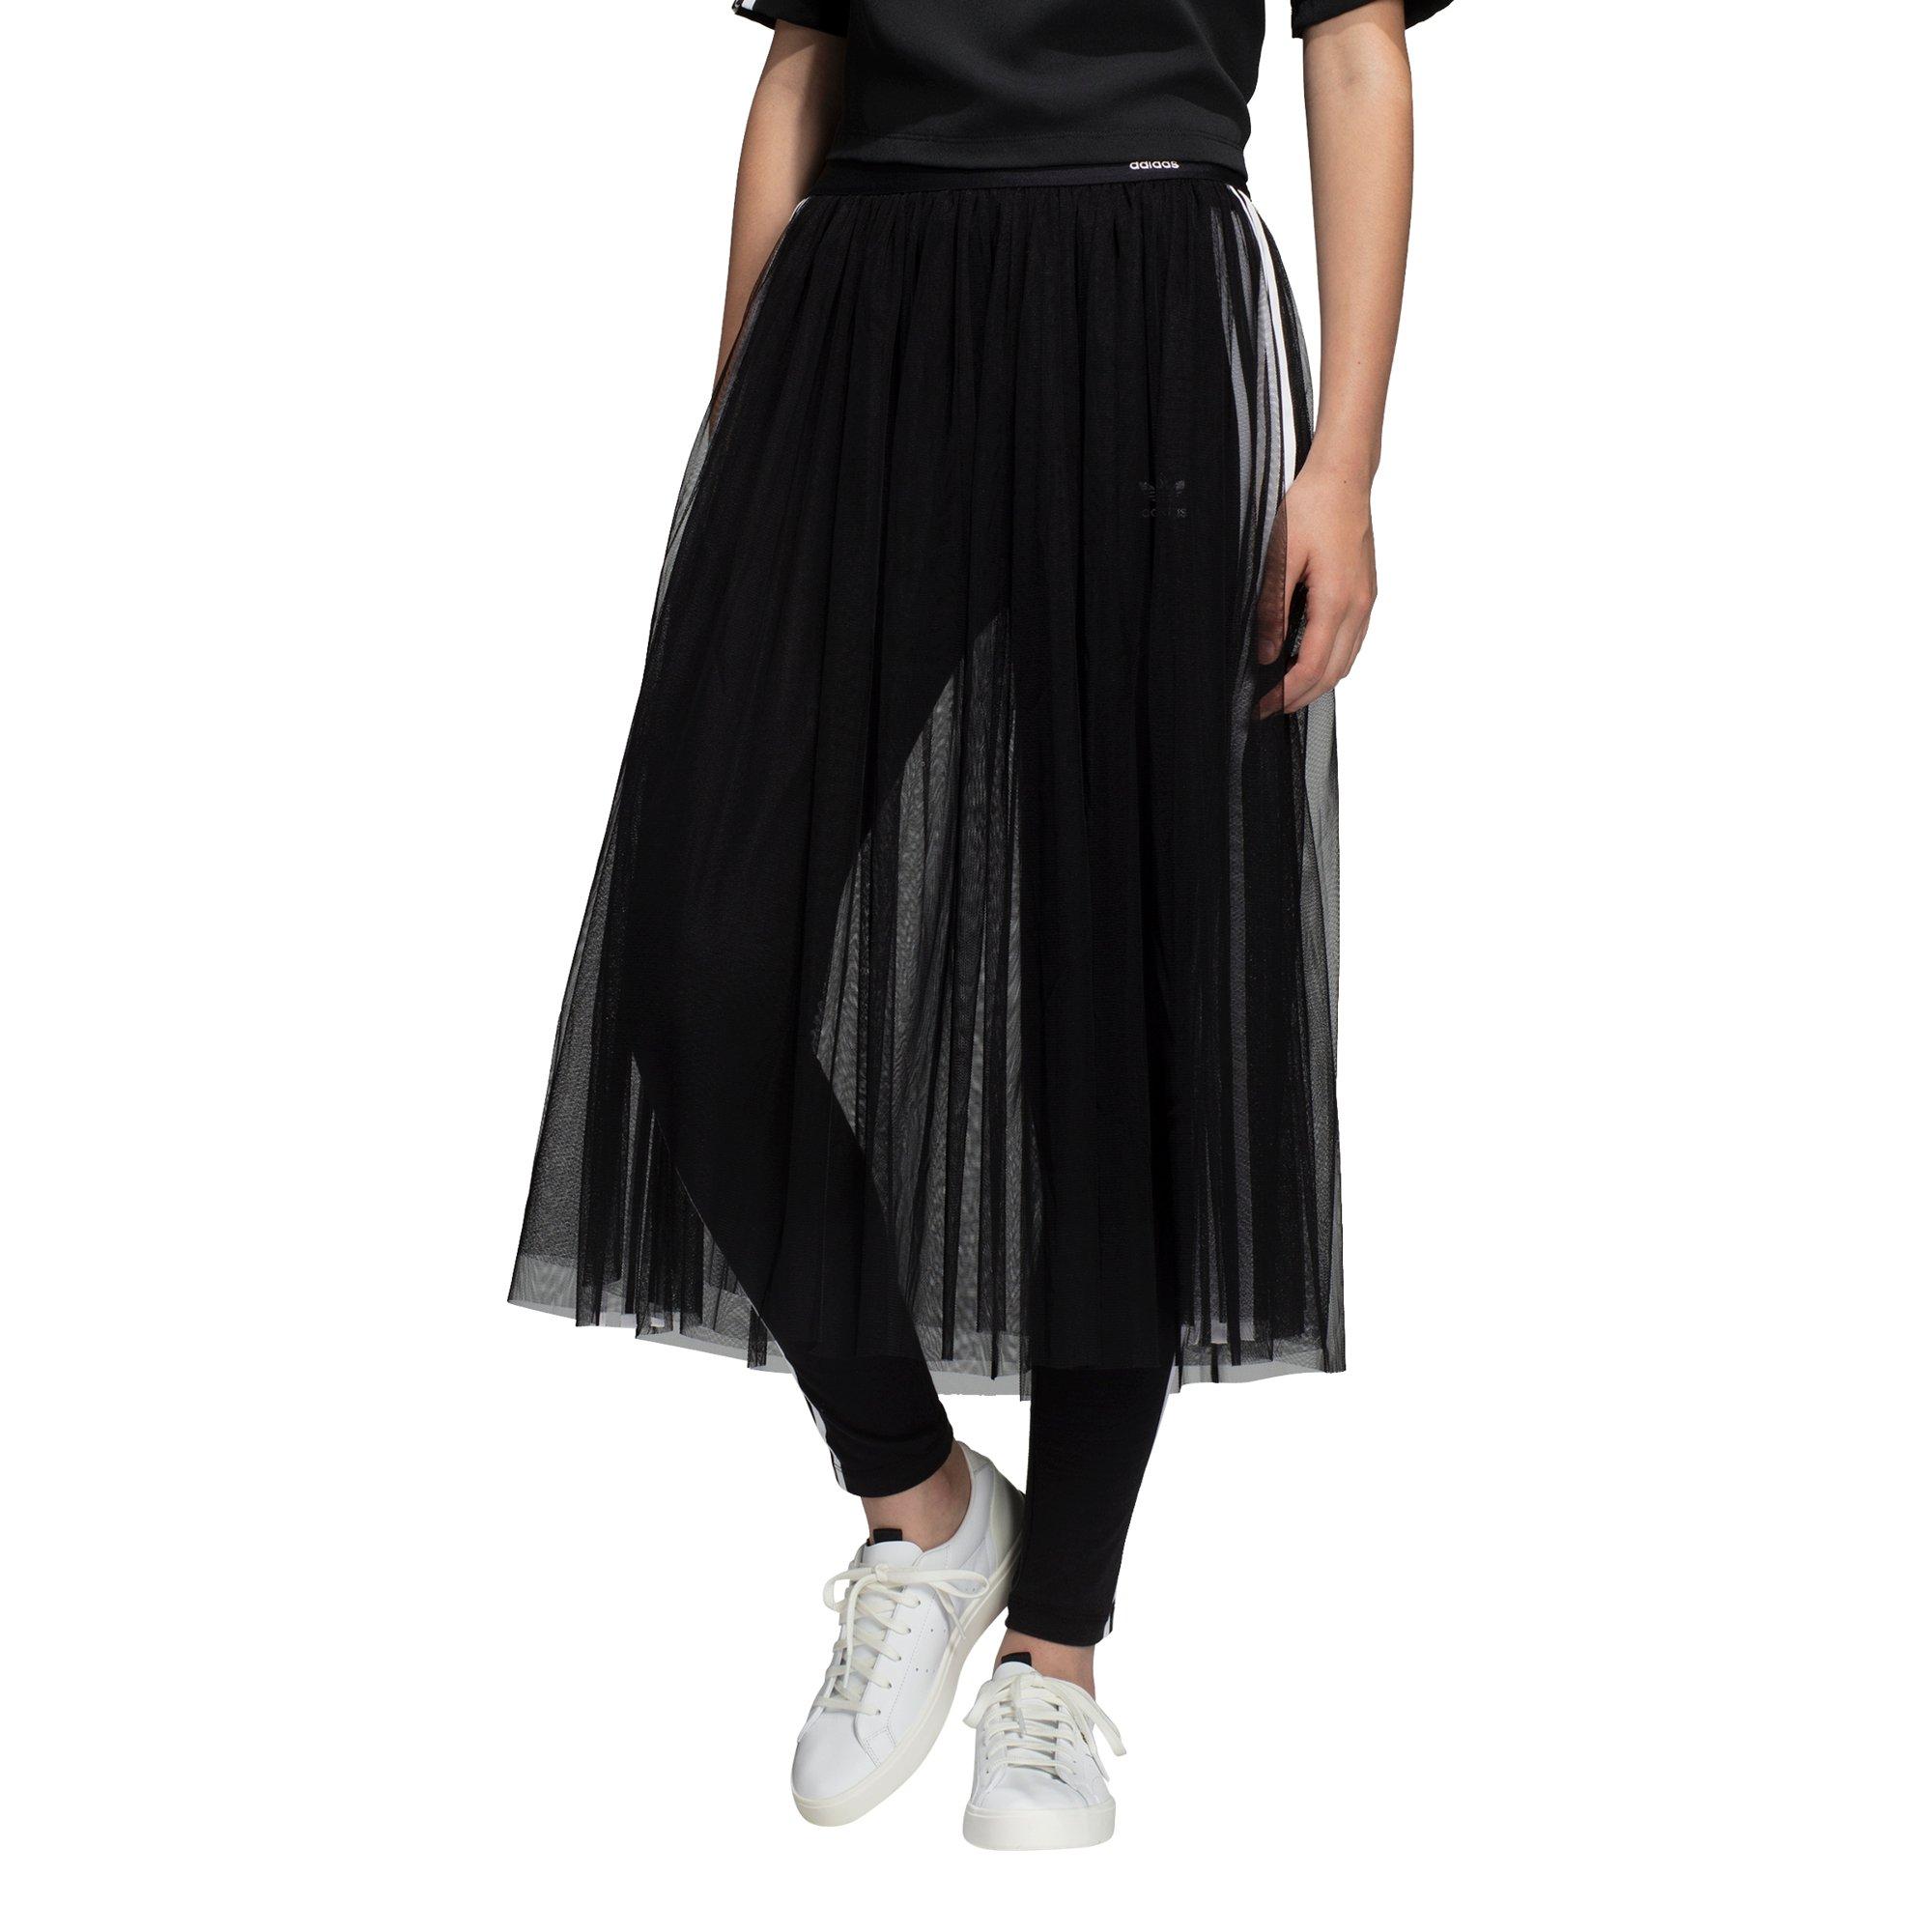 adidas tulle skirt outfit